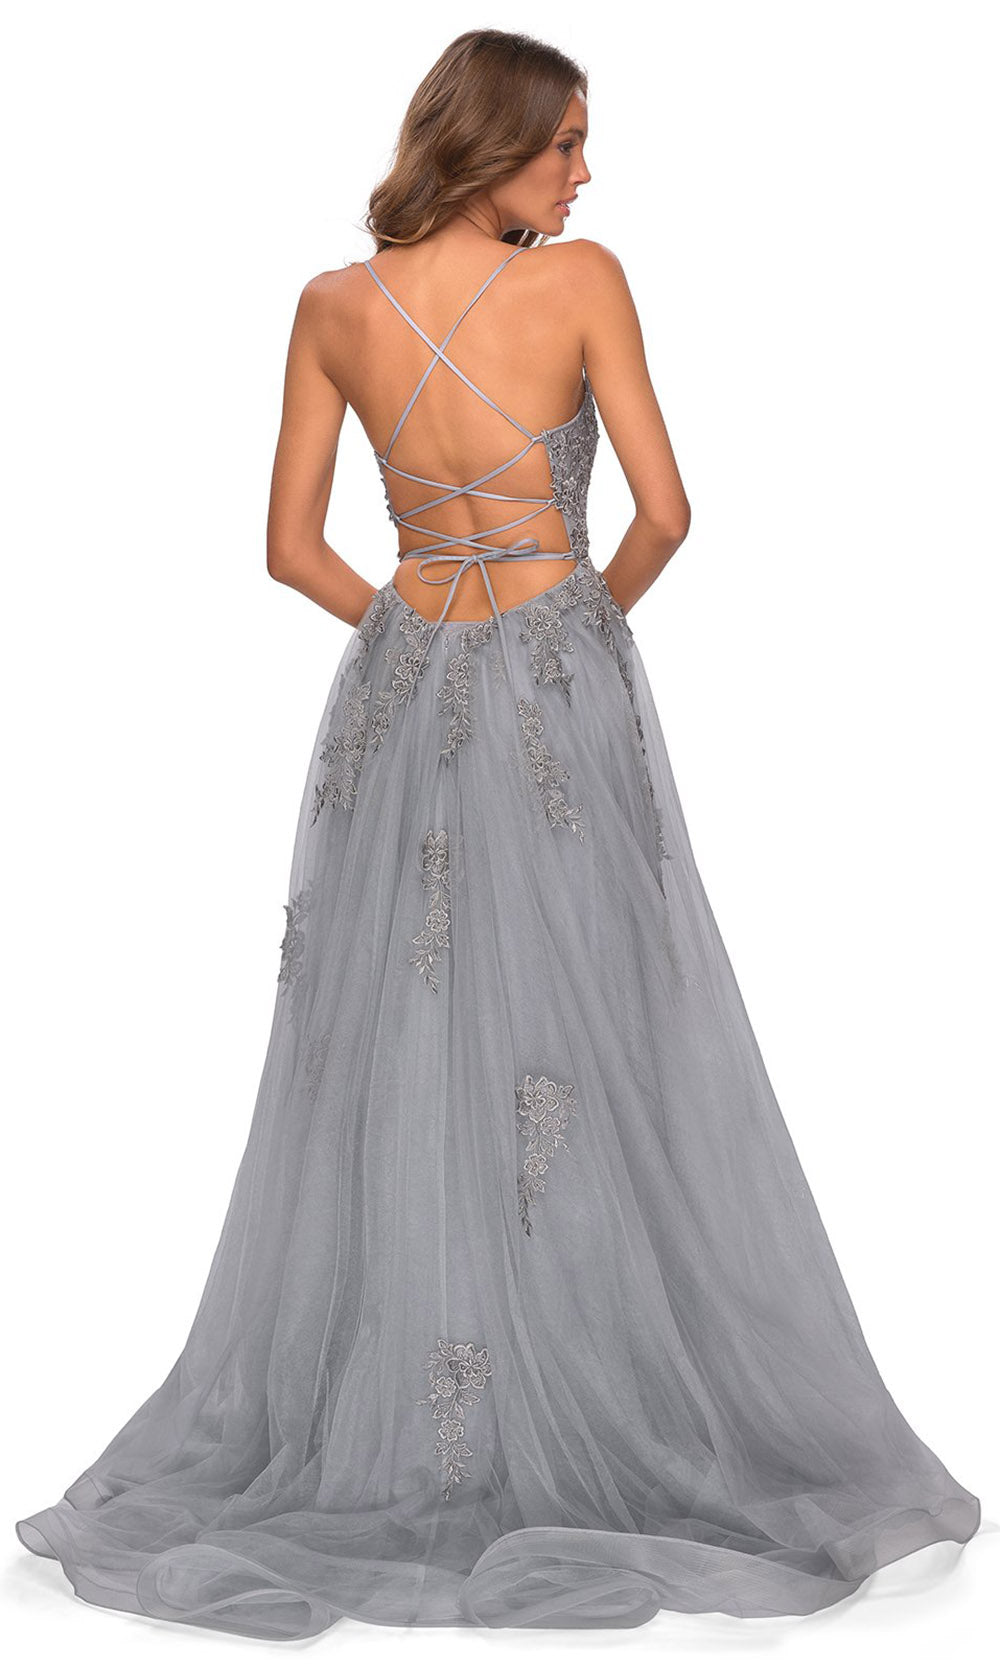 La Femme - 28470 Floral Lace Tulle Slit A-Line Gown In Silver & Gray